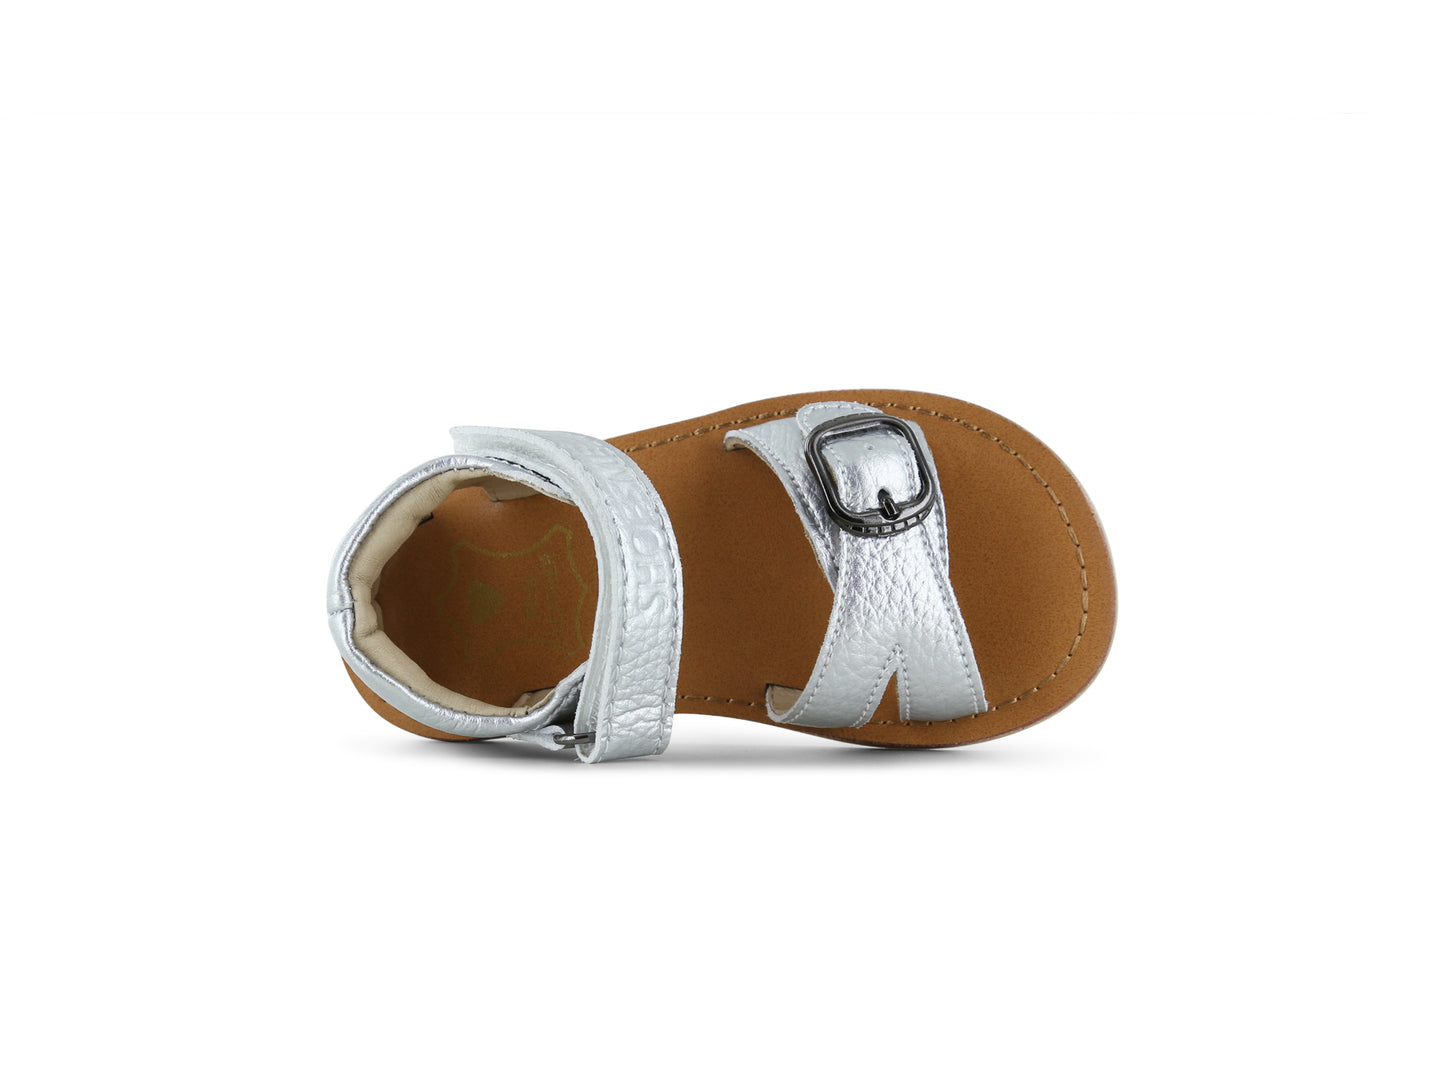 A girl's open toe closed back sandal by Shoesme, style CS24S001-C, in silver leather with velcro and buckle fastening. Front view.